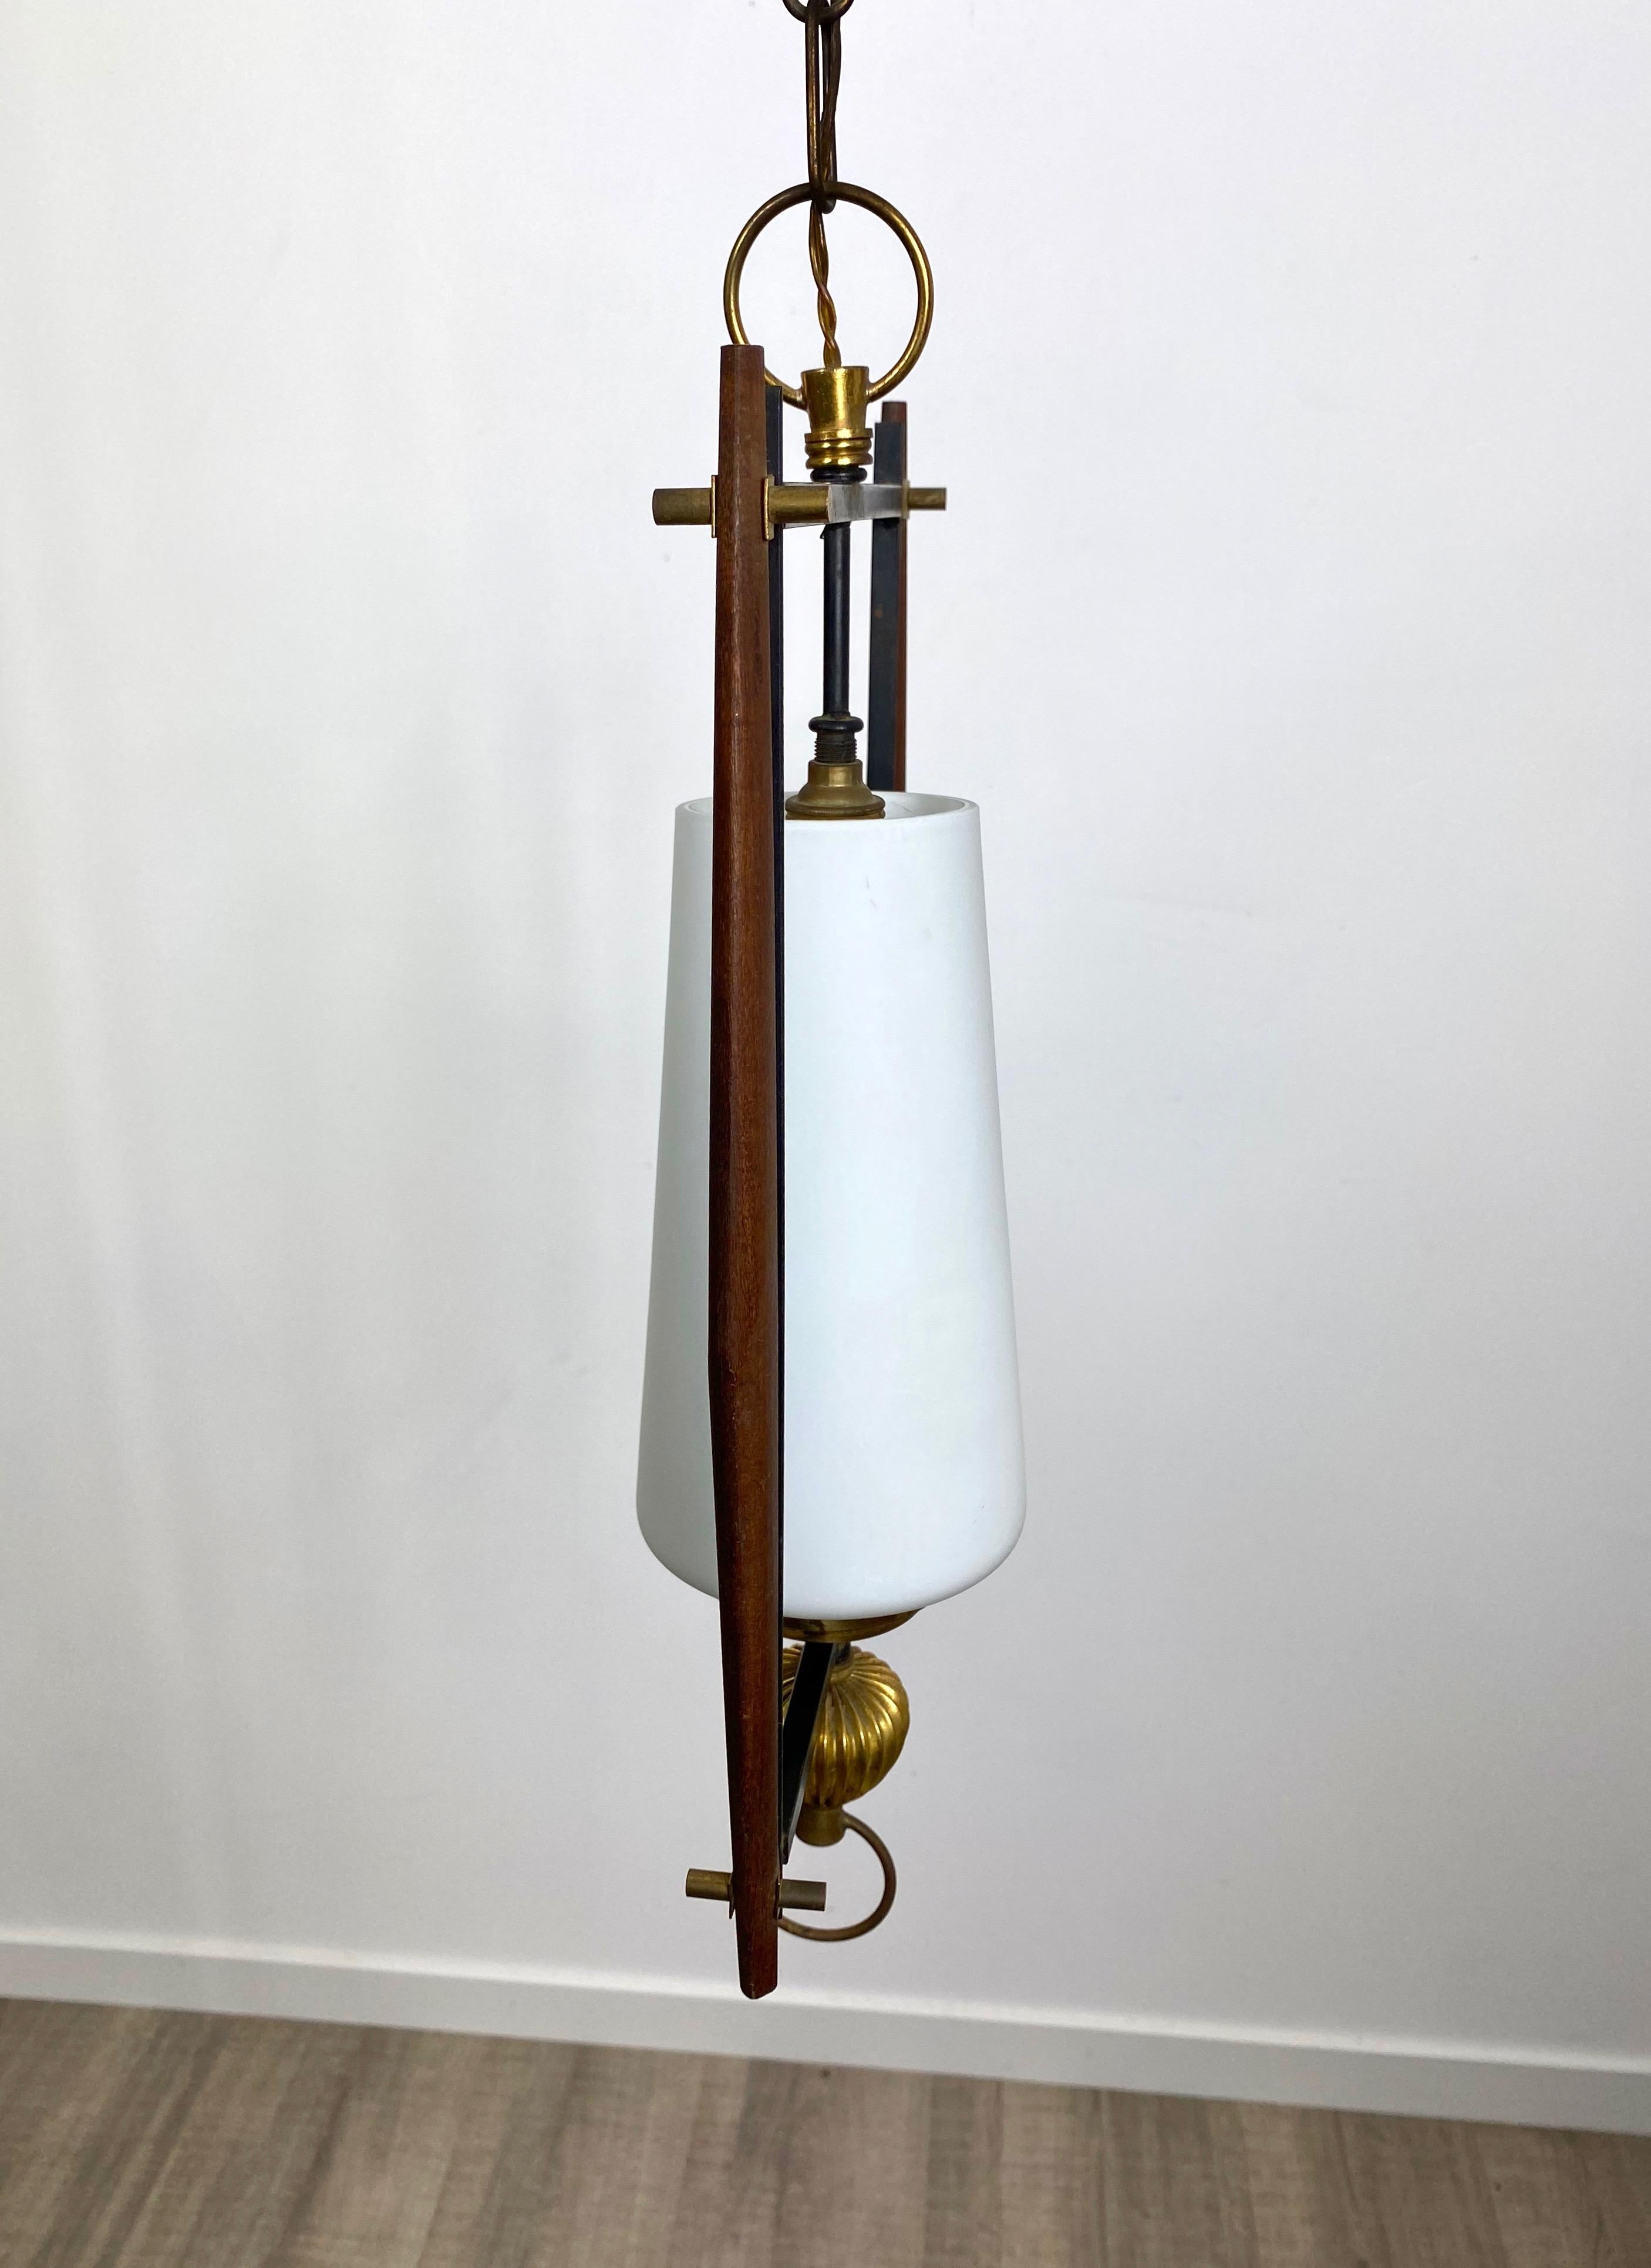 Mid-20th Century Chandelier in Teak and Opaline Glass Metal Pendant Stilnovo Style, Italy, 1960s For Sale